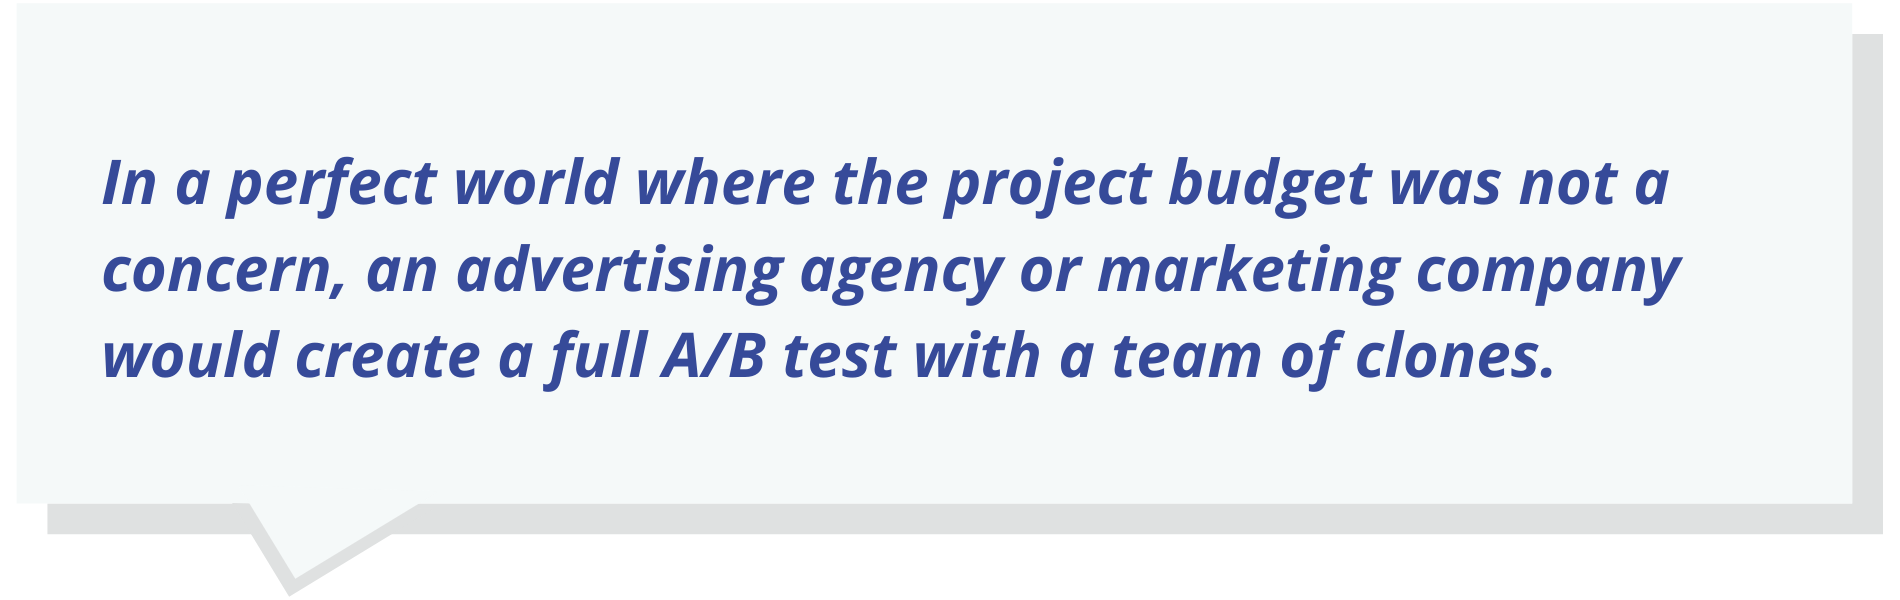 In a perfect world where the project budget was not a concern, an advertising agency or marketing company would create a full A/B test with a team of clones.